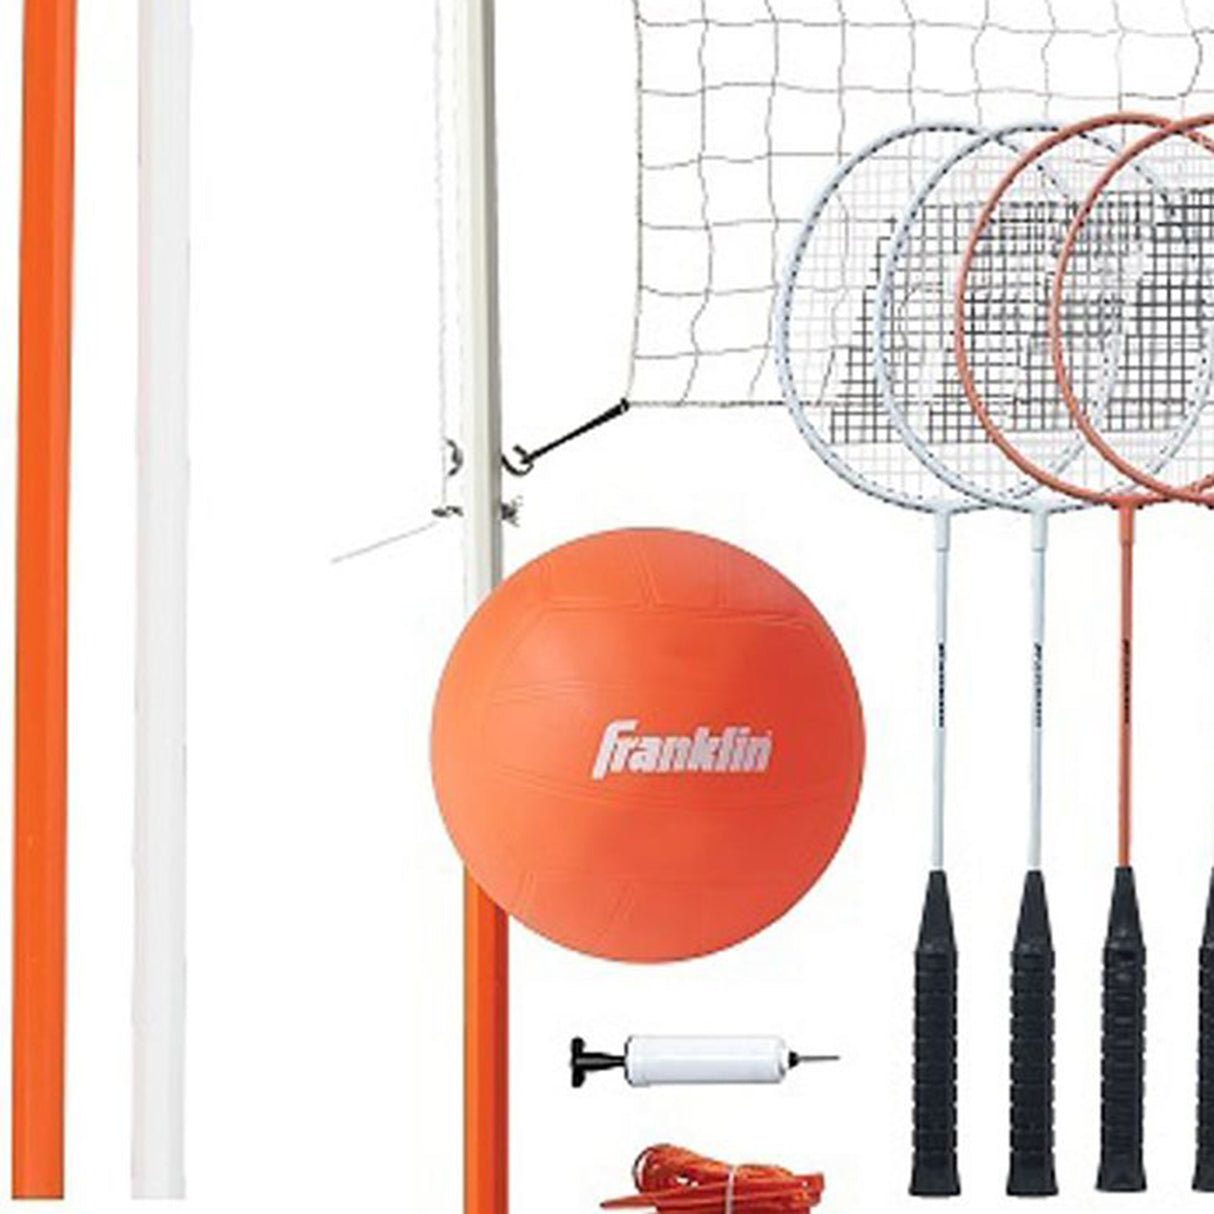 Starter Volleyball And Badminton Set